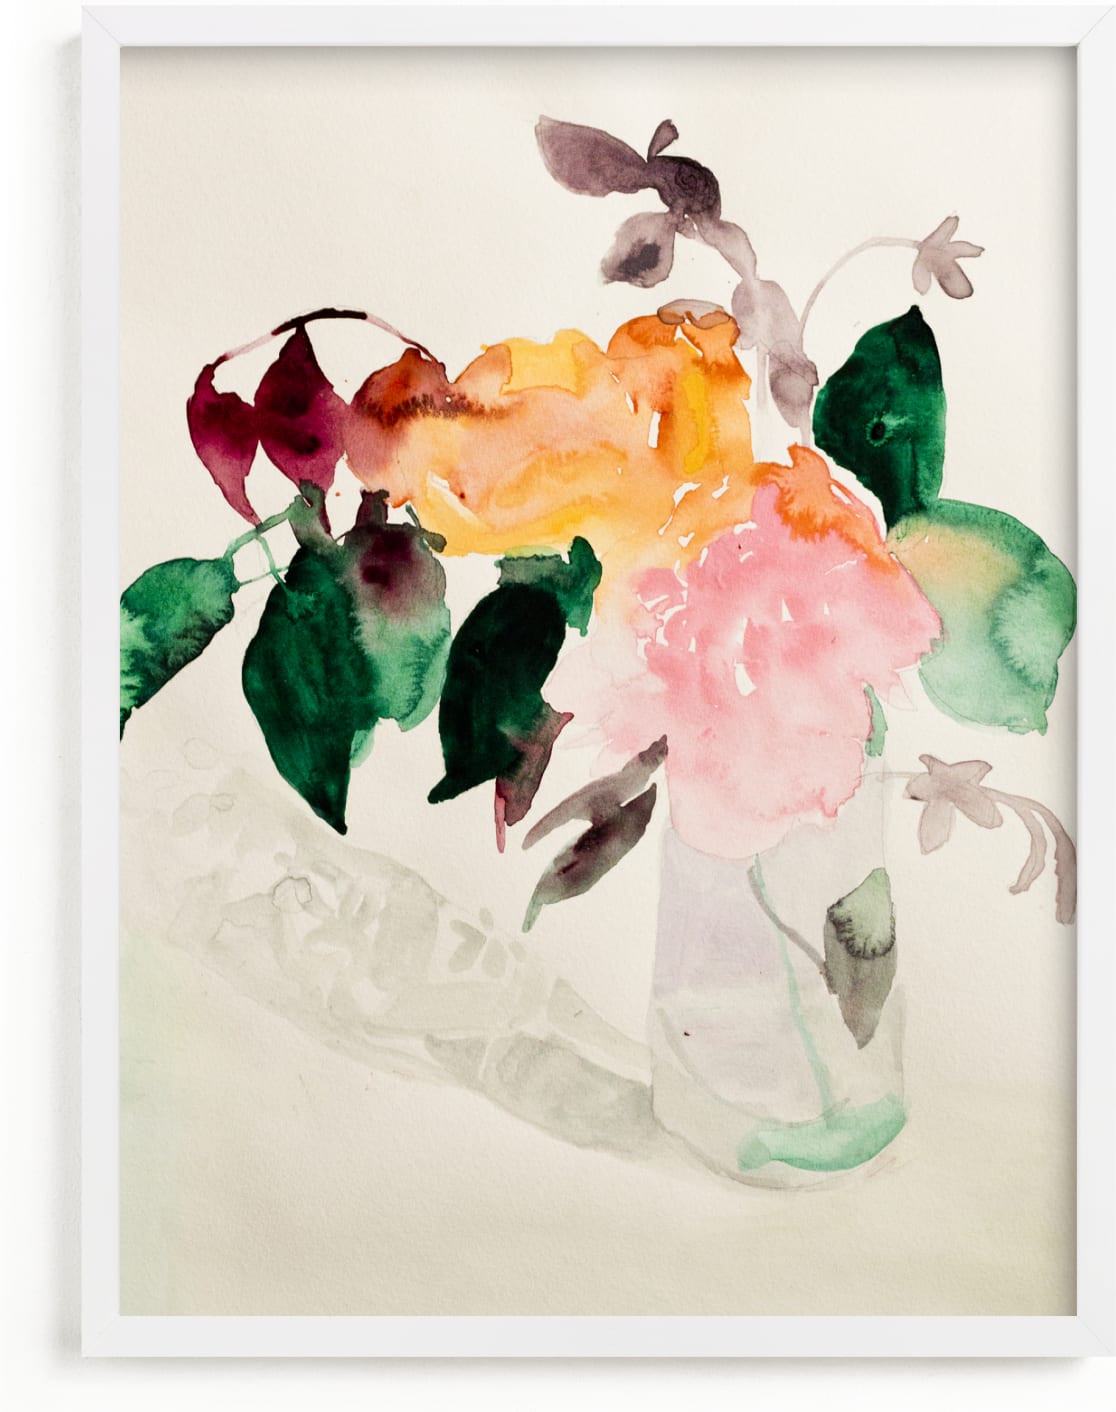 This is a colorful art by Betsyness Studio called Peonies.